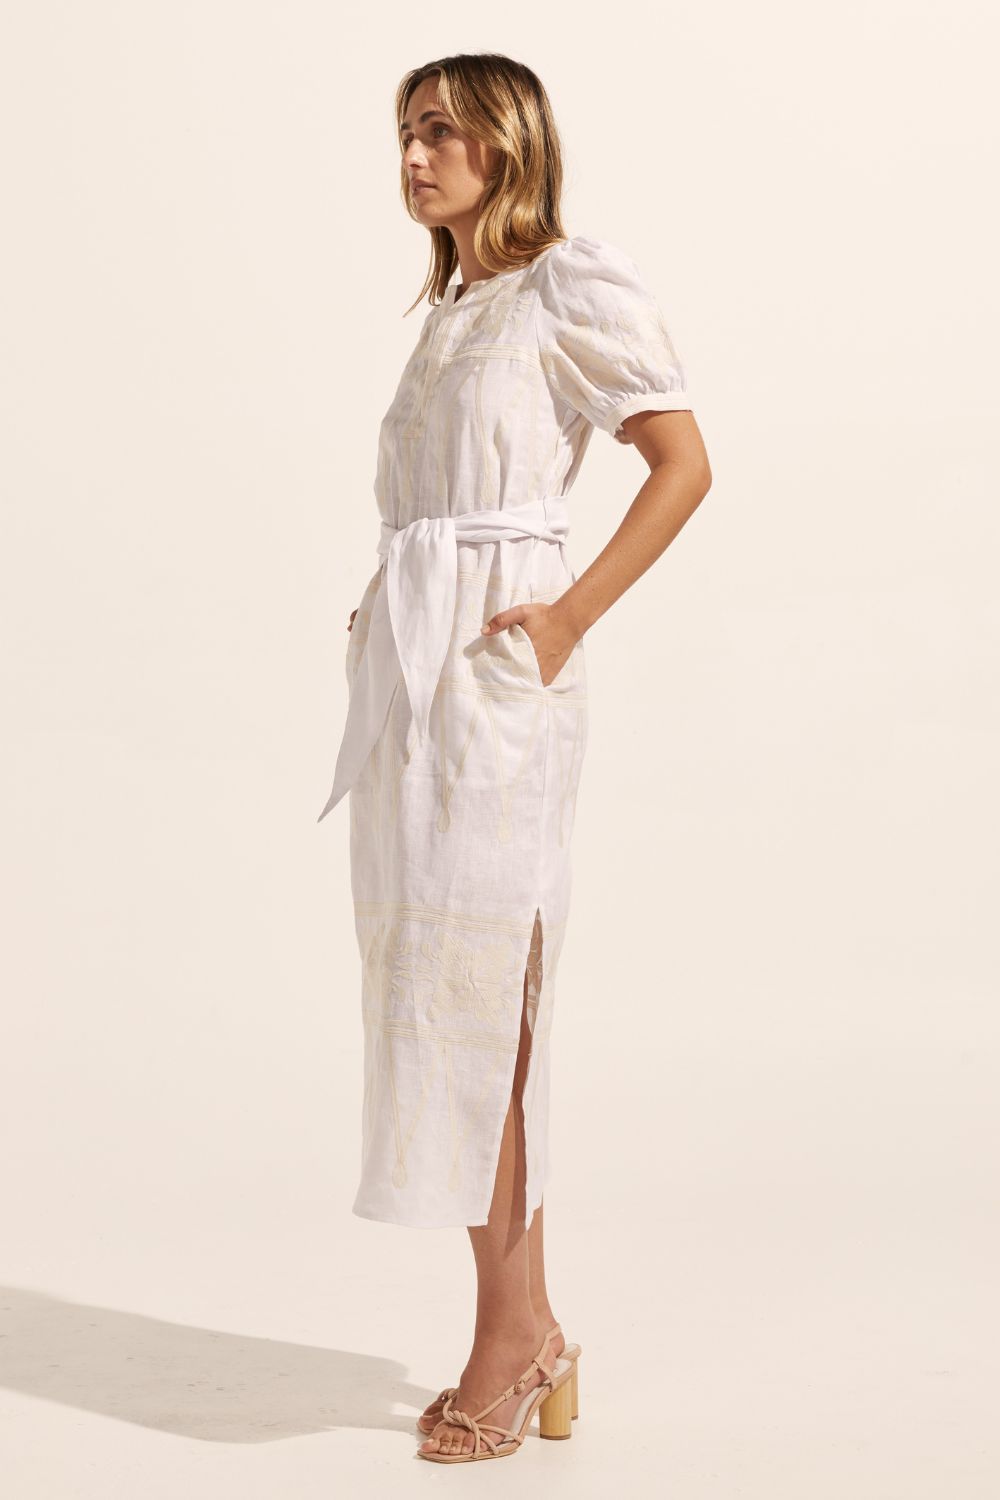 white and cream, midi dress, fabric self tie belt, mid length sleeve, embroidered,  rounded neckline, side splits, side pockets, side image